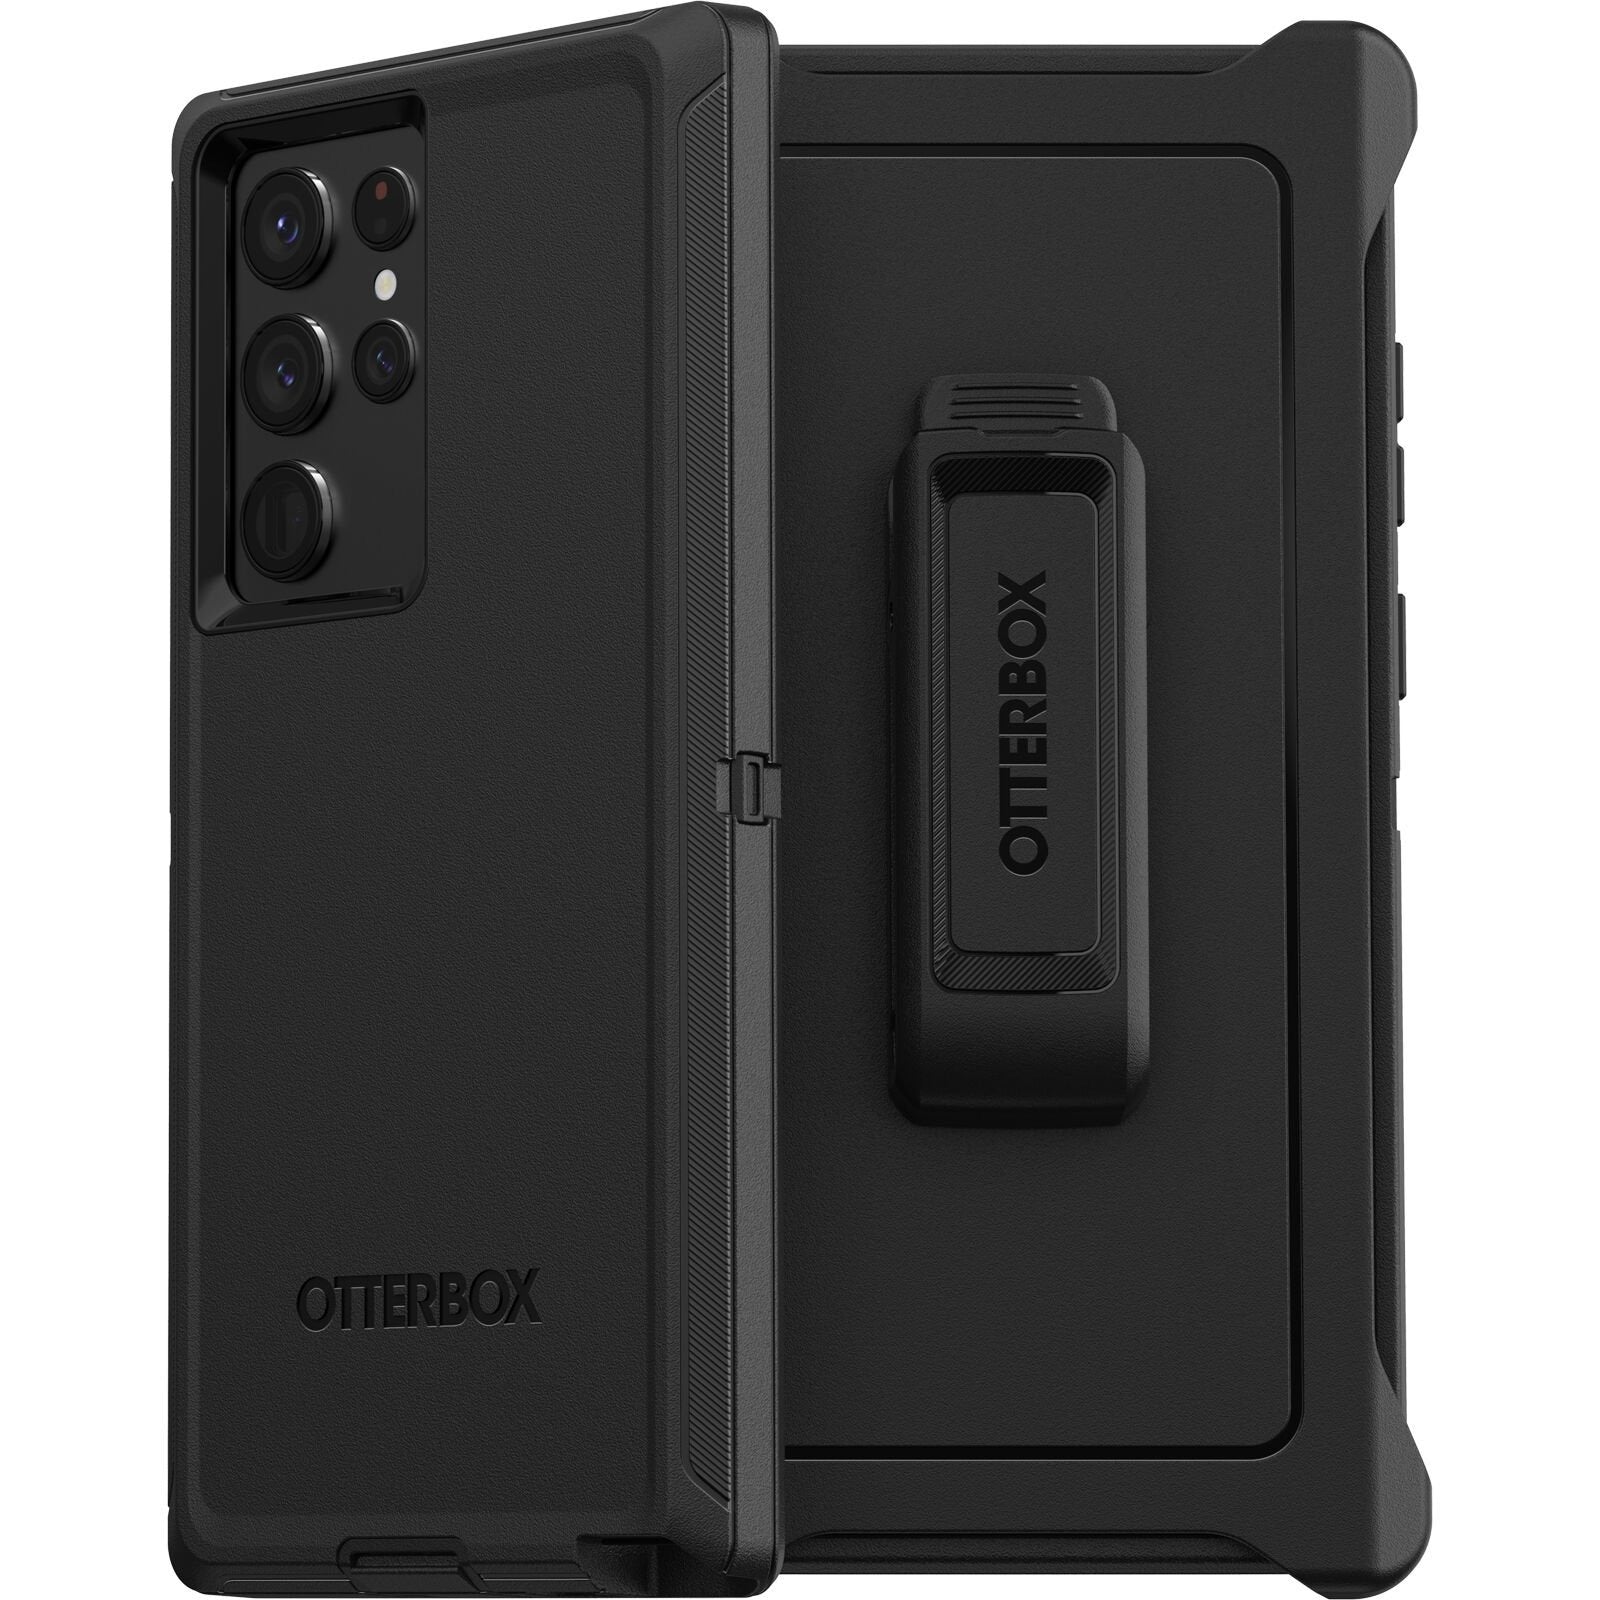 OtterBox DEFENDER SERIES case for Samsung Galaxy S22 Ultra - Black (Certified Refurbished)